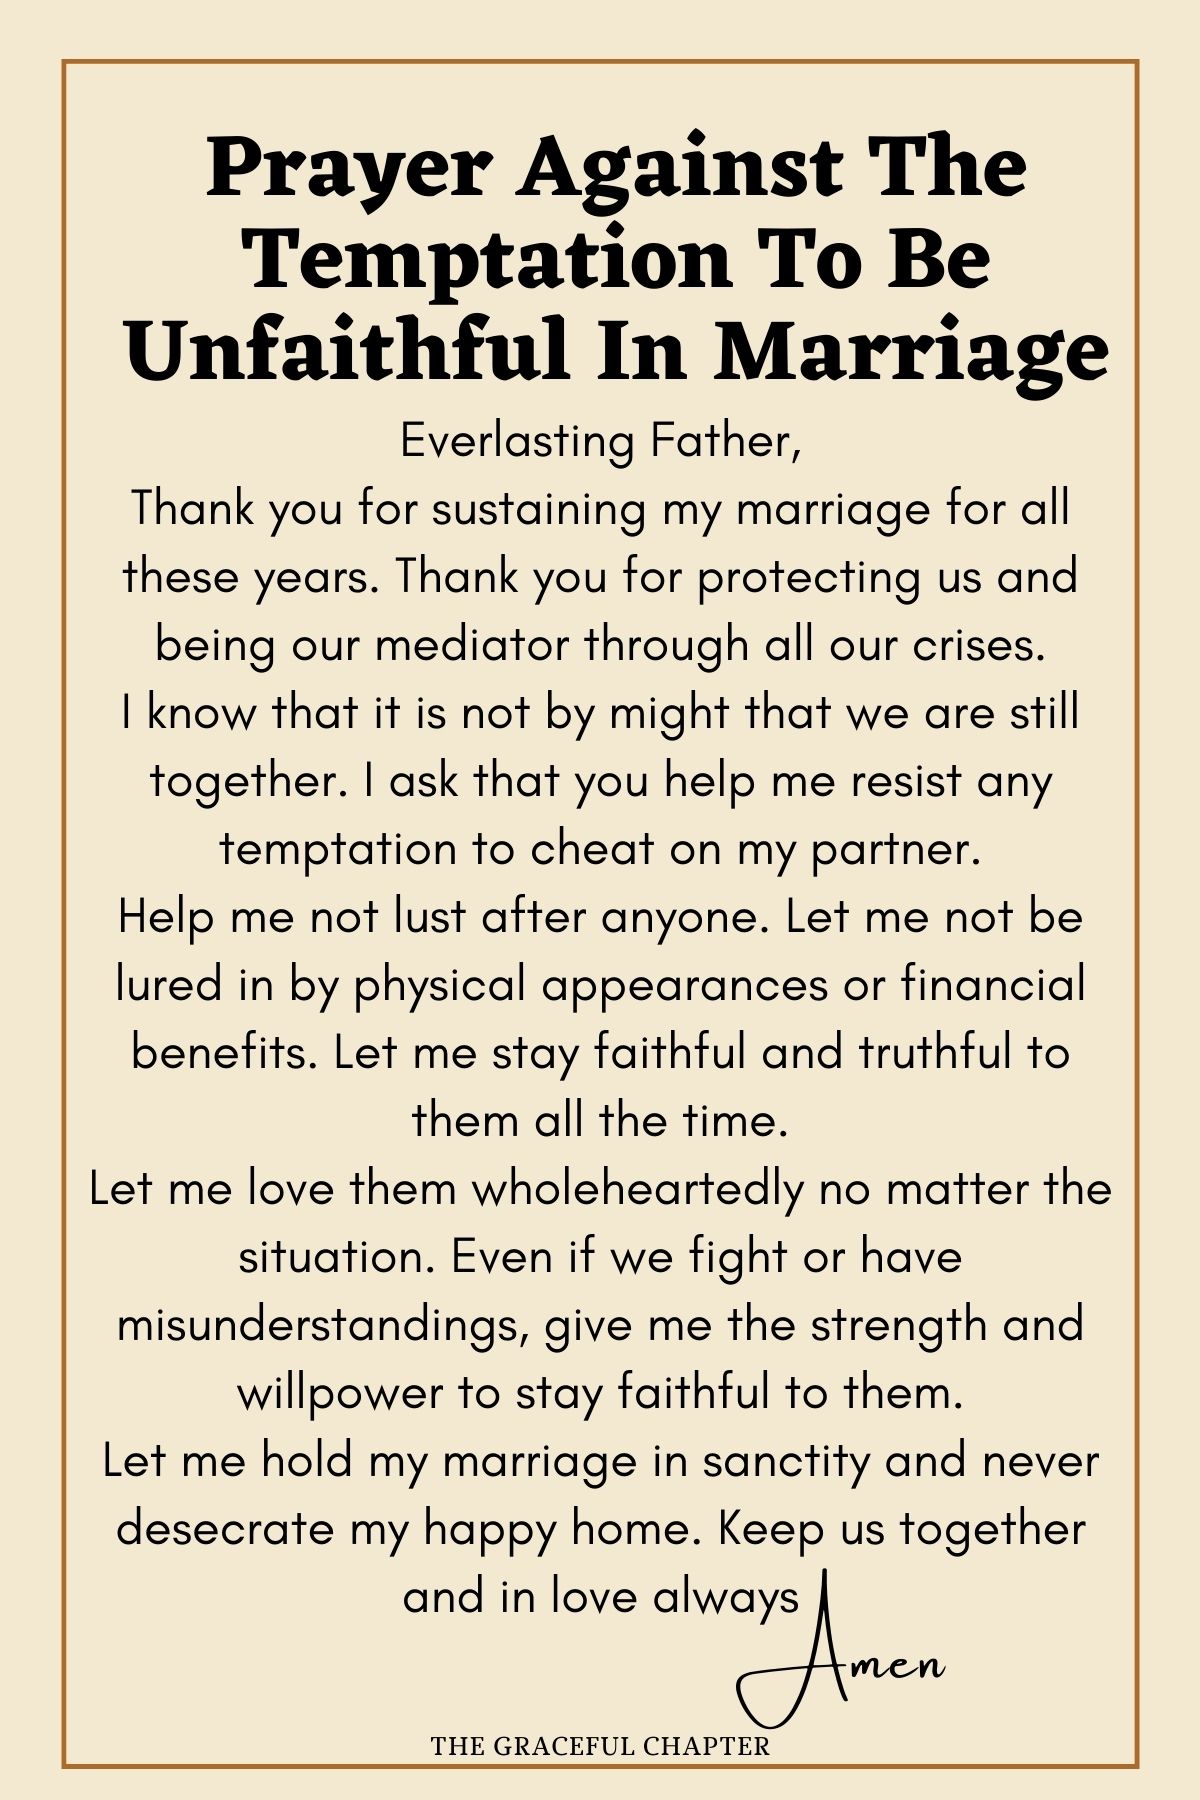 Prayer against the temptation to be unfaithful in marriage